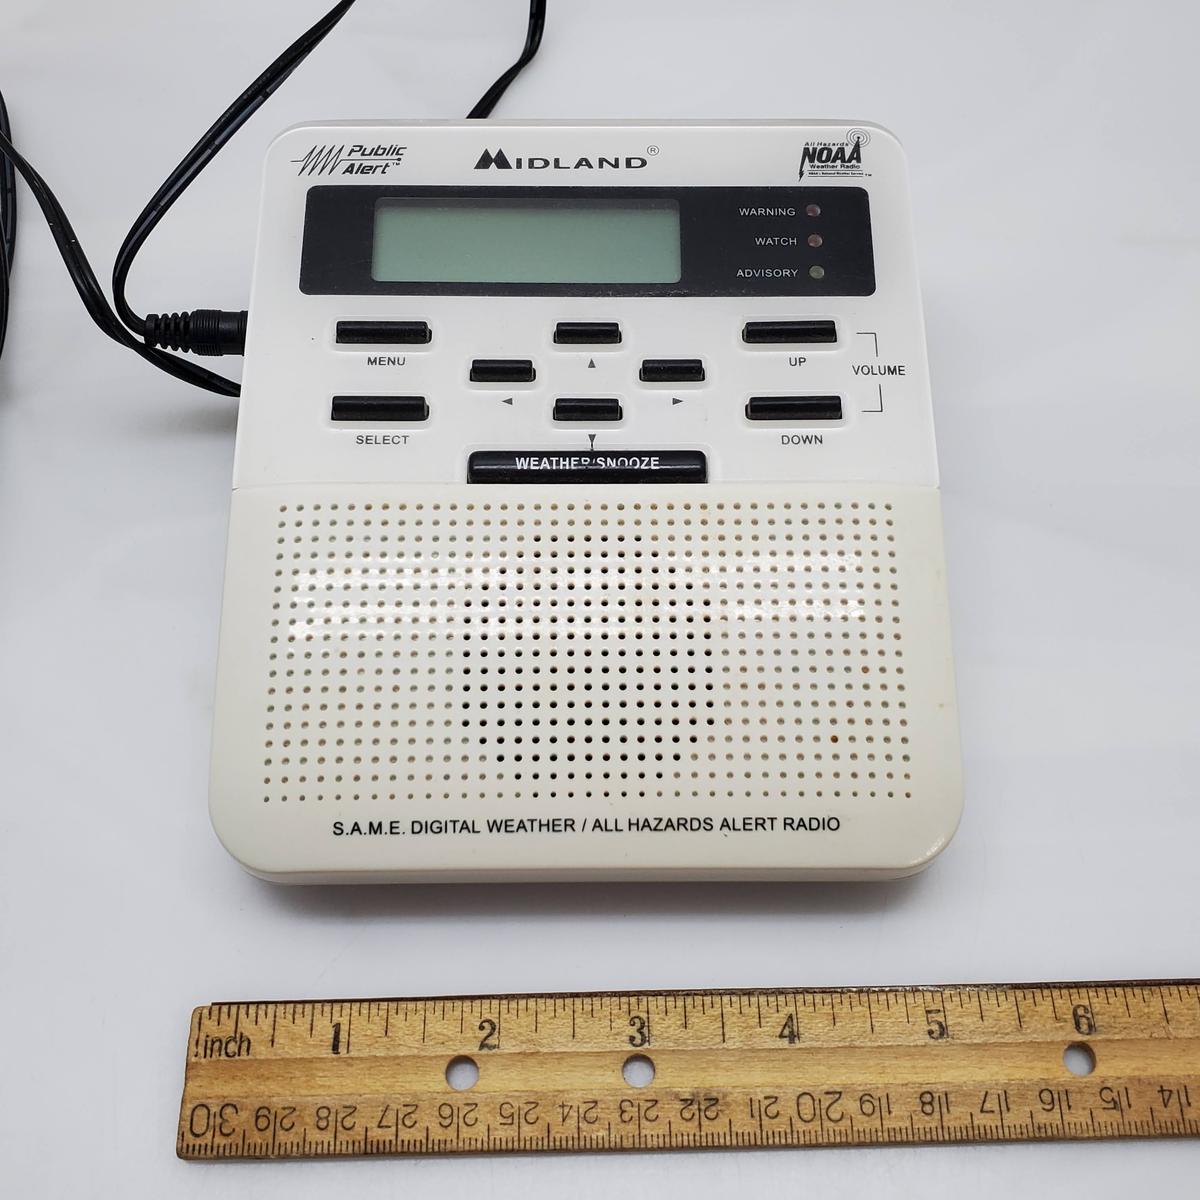 Midland S.A.M.E. Digital Weather/All Hazards Alert Radio - Tested and Works